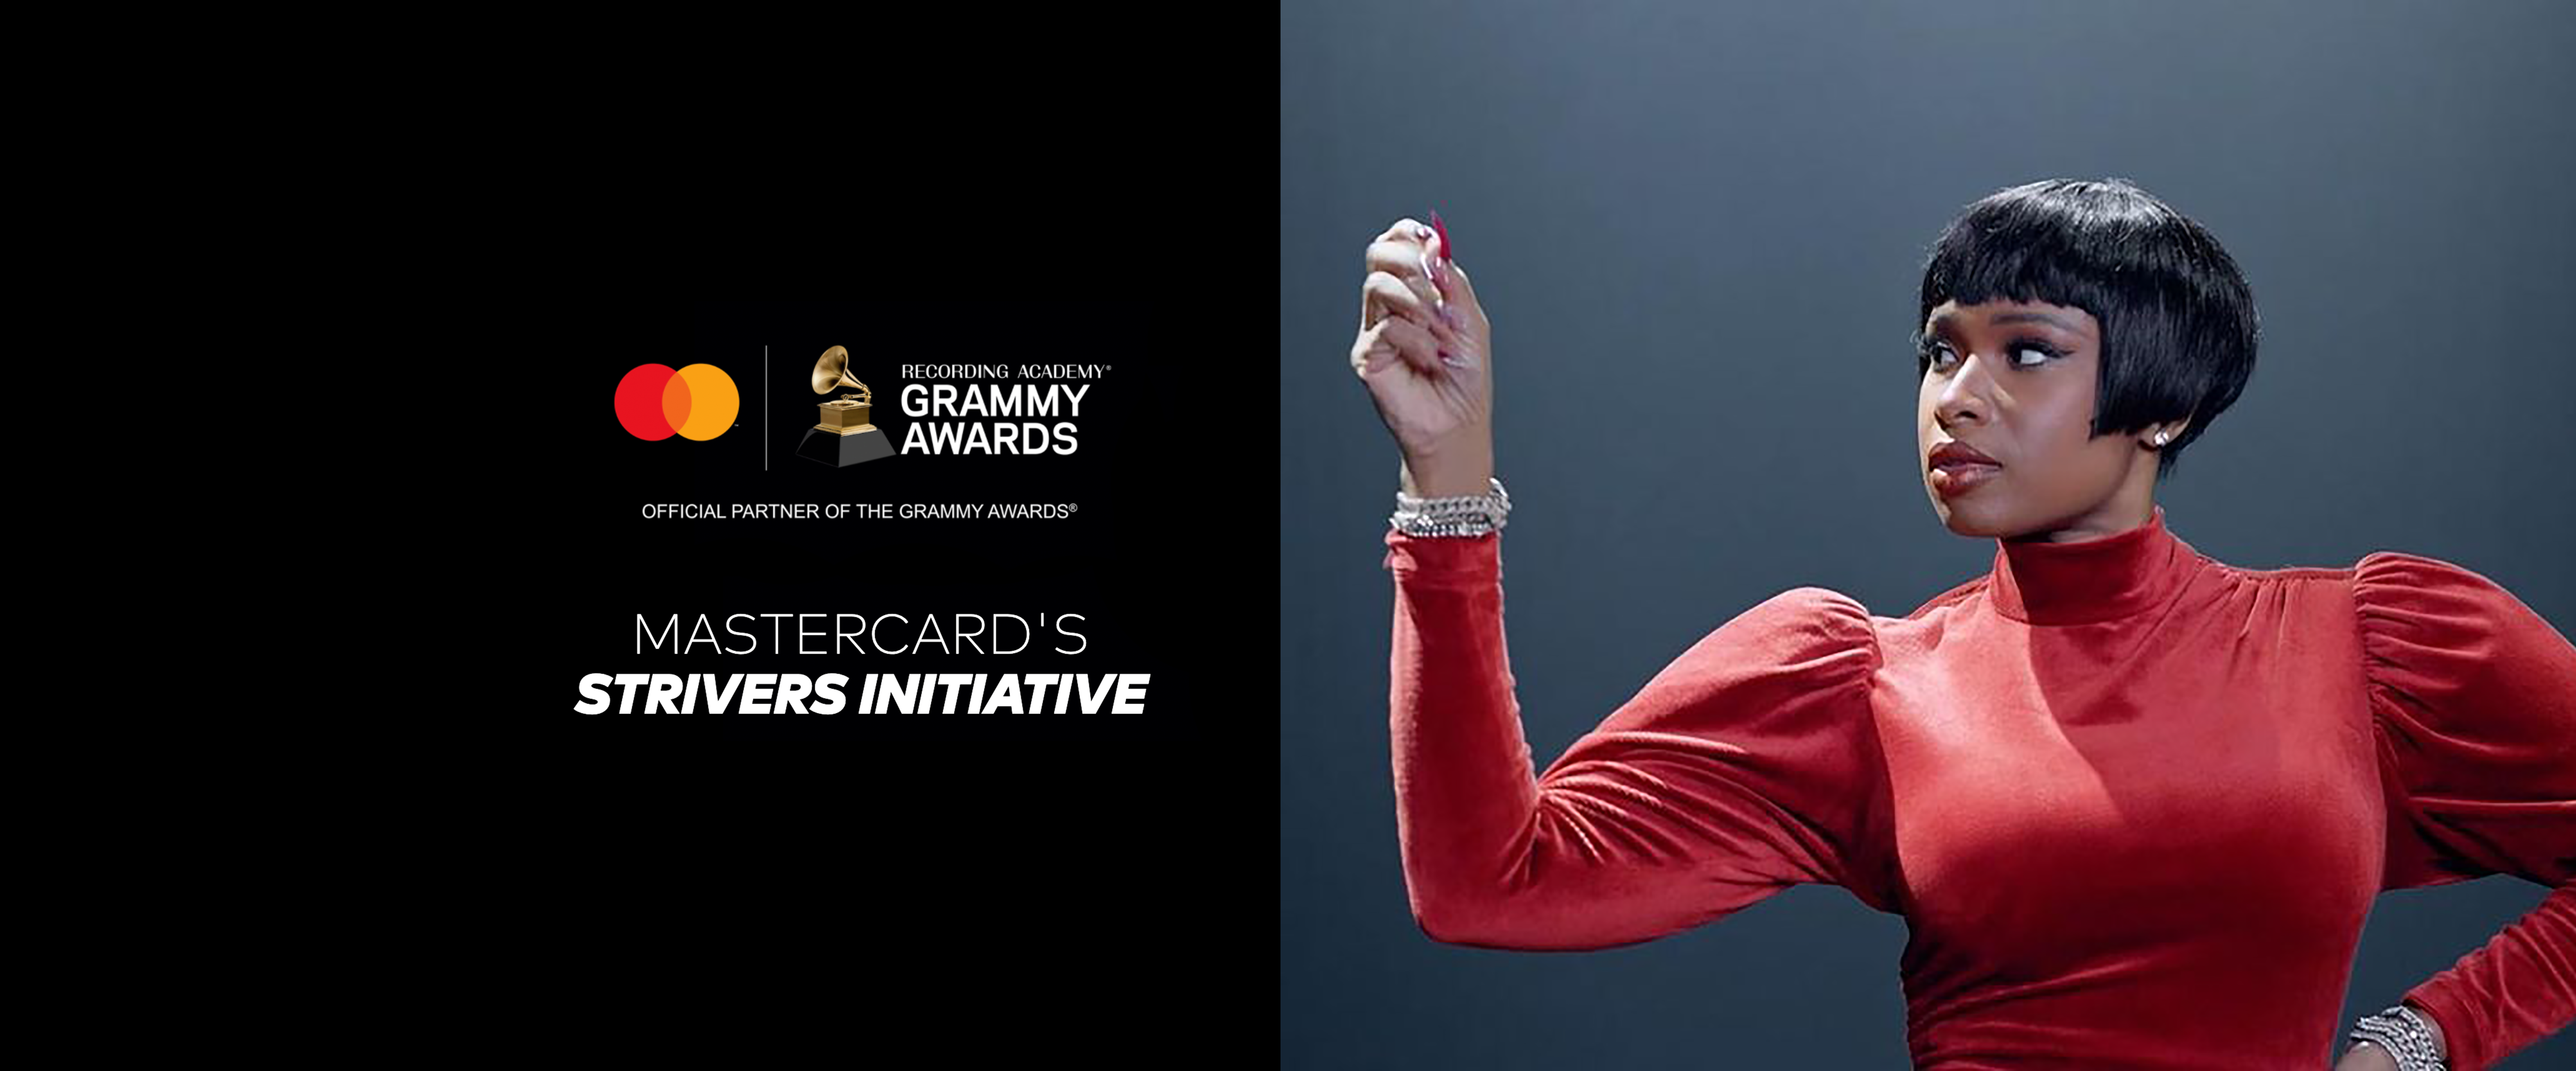 Mastercard and the Recording Academy® welcomes you to a GRAMMY Awards® themed augmented reality experience